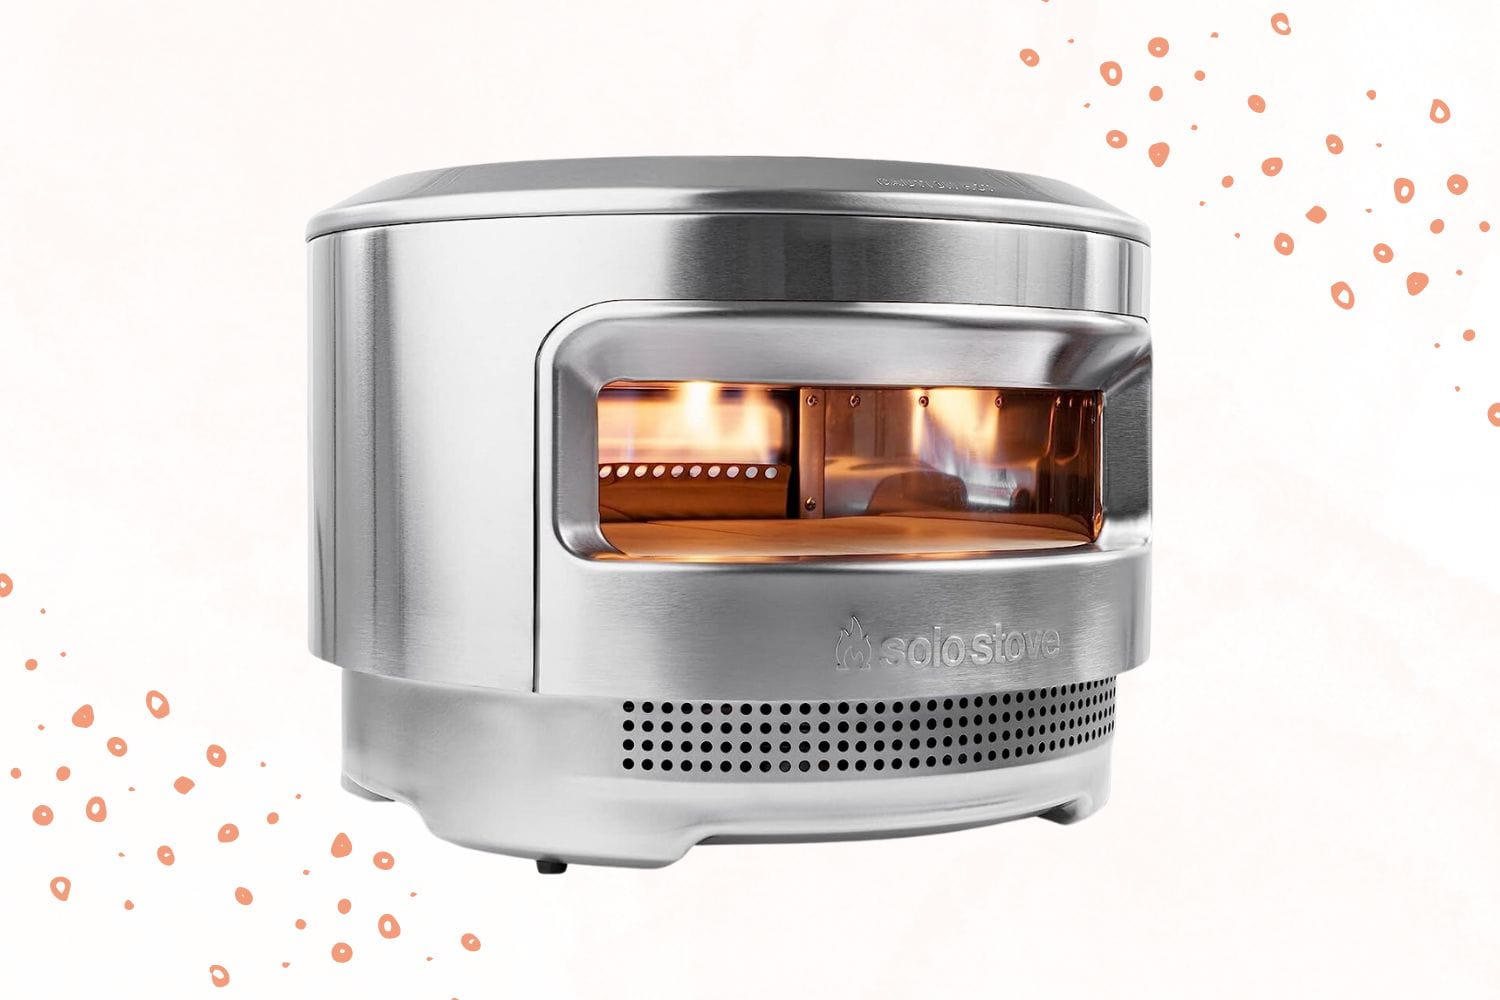 Solo Stove Pizza Oven Review